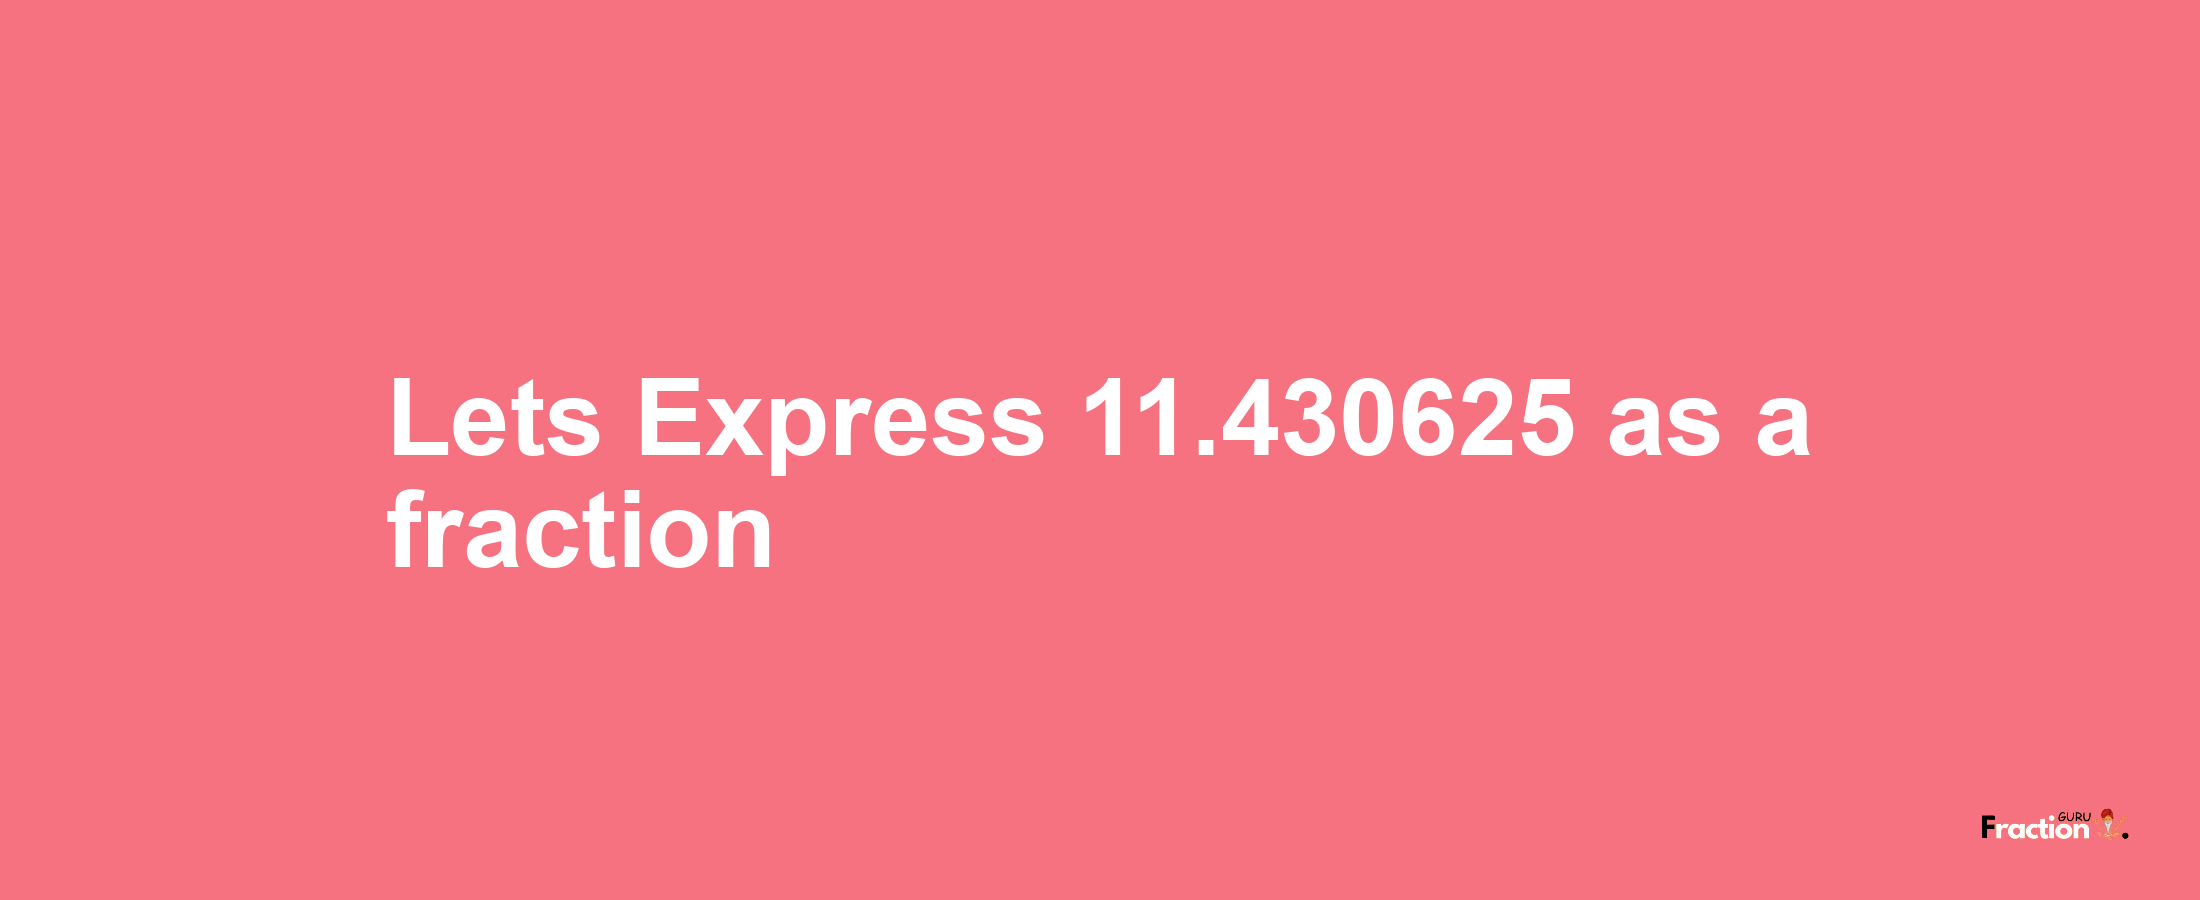 Lets Express 11.430625 as afraction